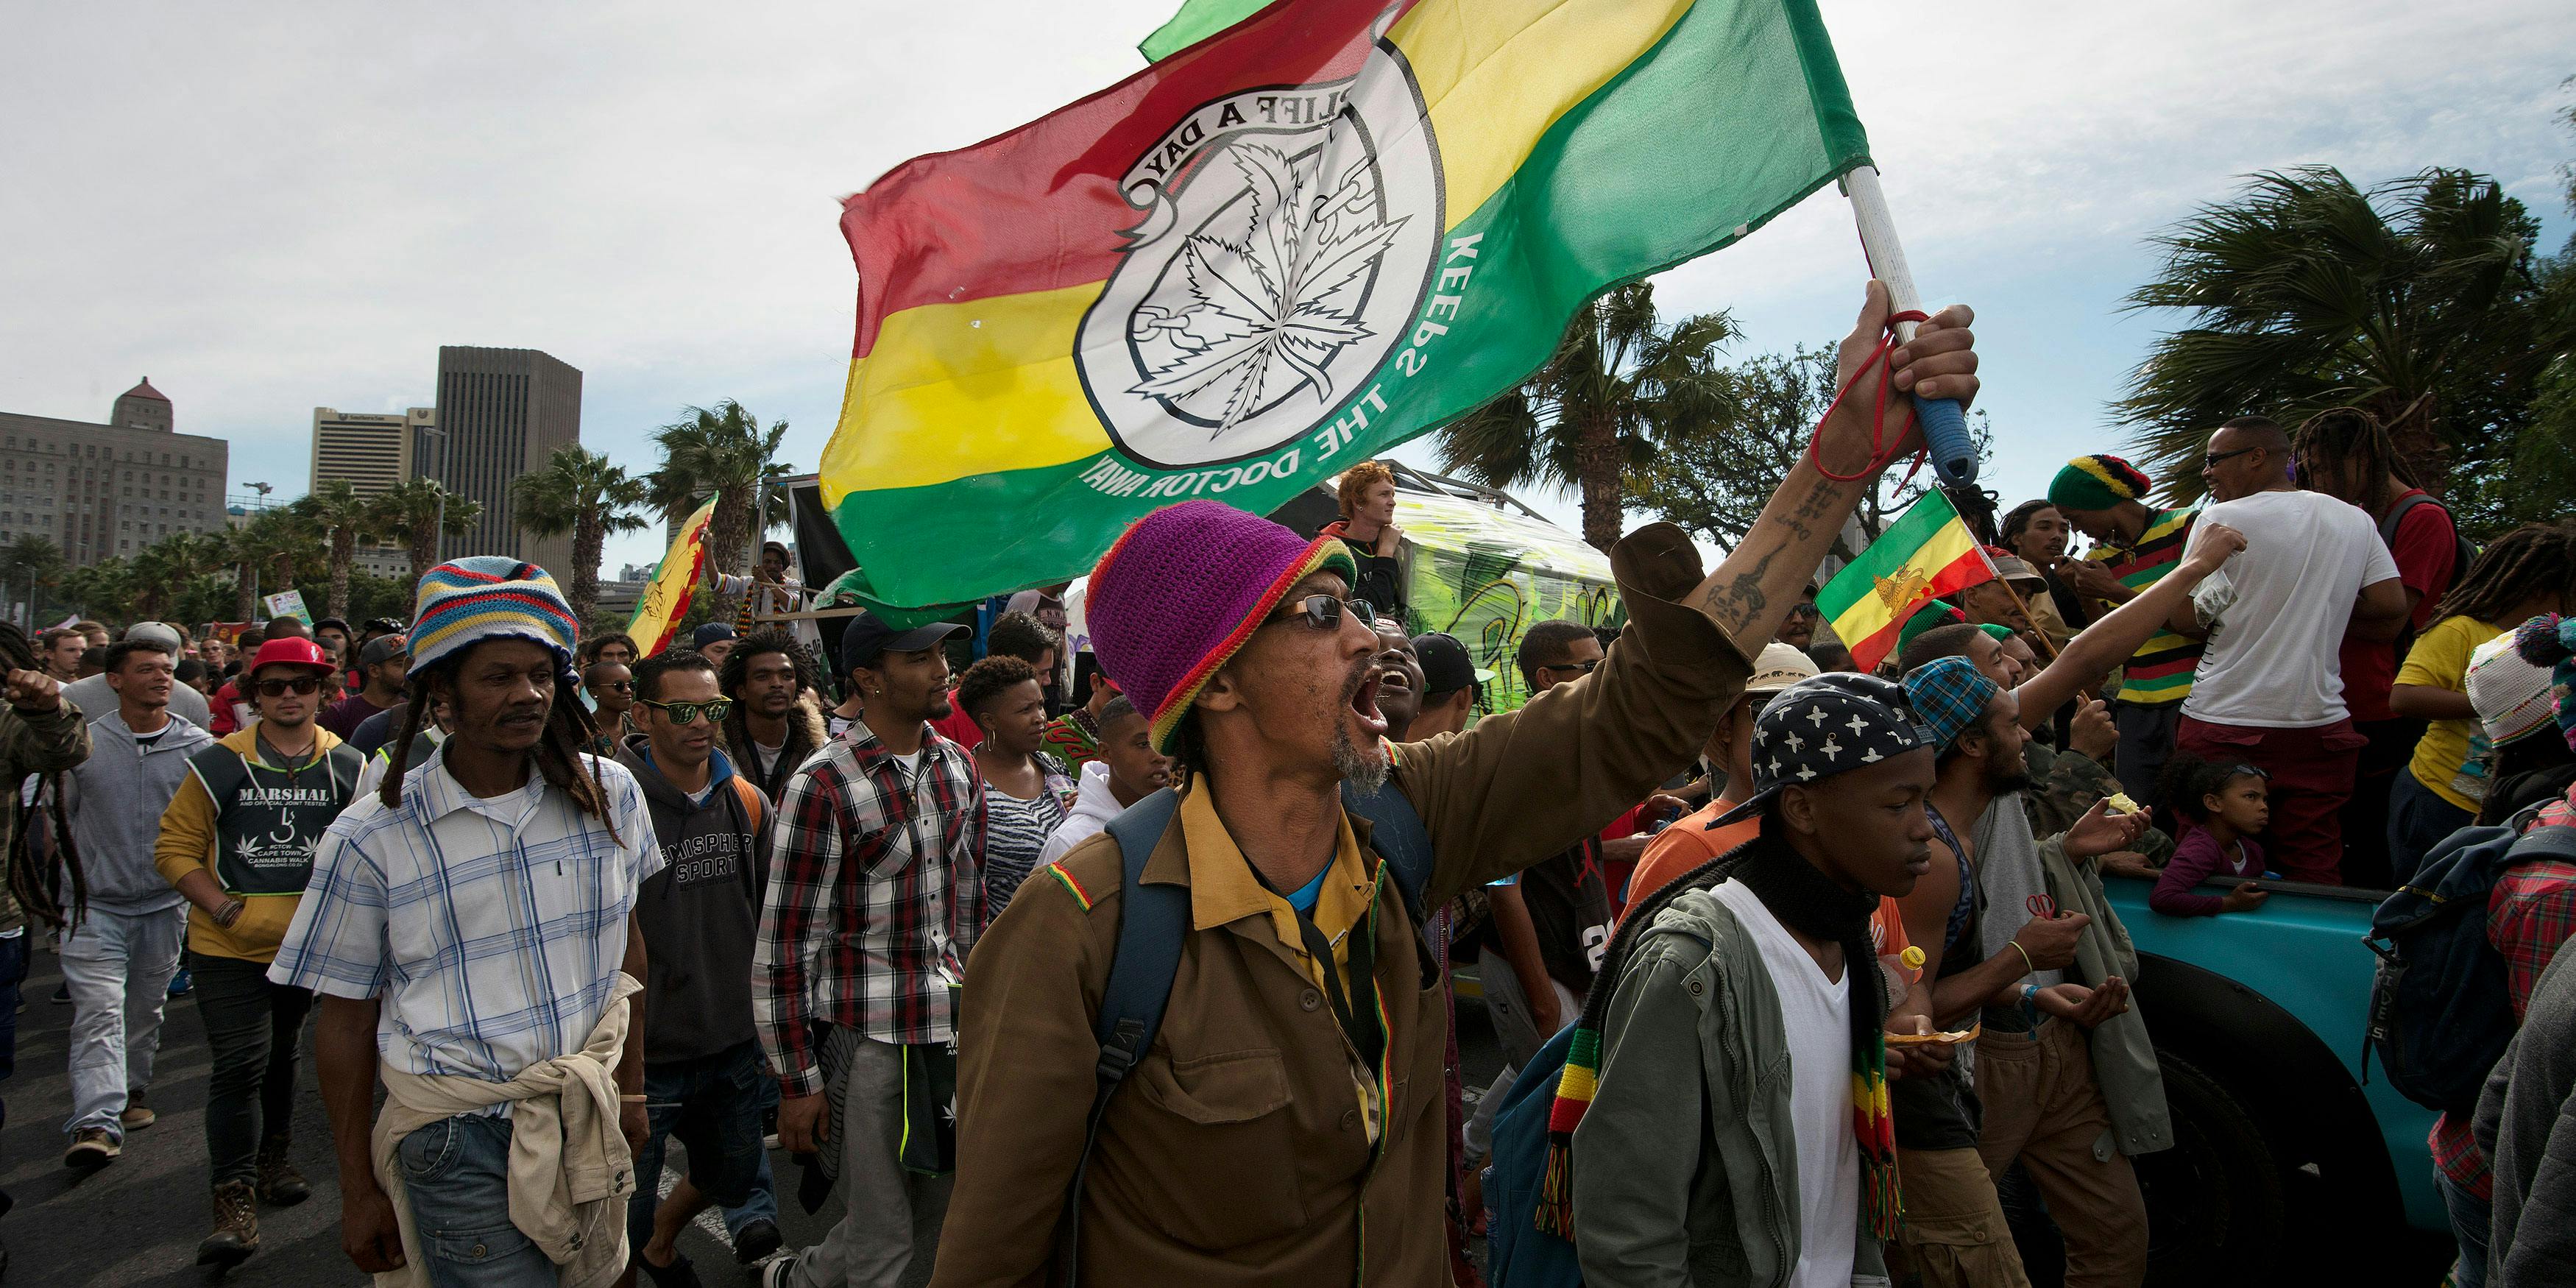 Thousands of people take part in a march through the central city, calling for the South African government to legalize marijuana or cannabis (also called dagga locally) on May 7, 2016 in Cape Town. In this story, “South Africa legalizes cannabis,” we report on the decision of the country’s highest court to permit cannabis use in the home for personal use. (Photo by Rodger Bosch/AFP/Getty Images)